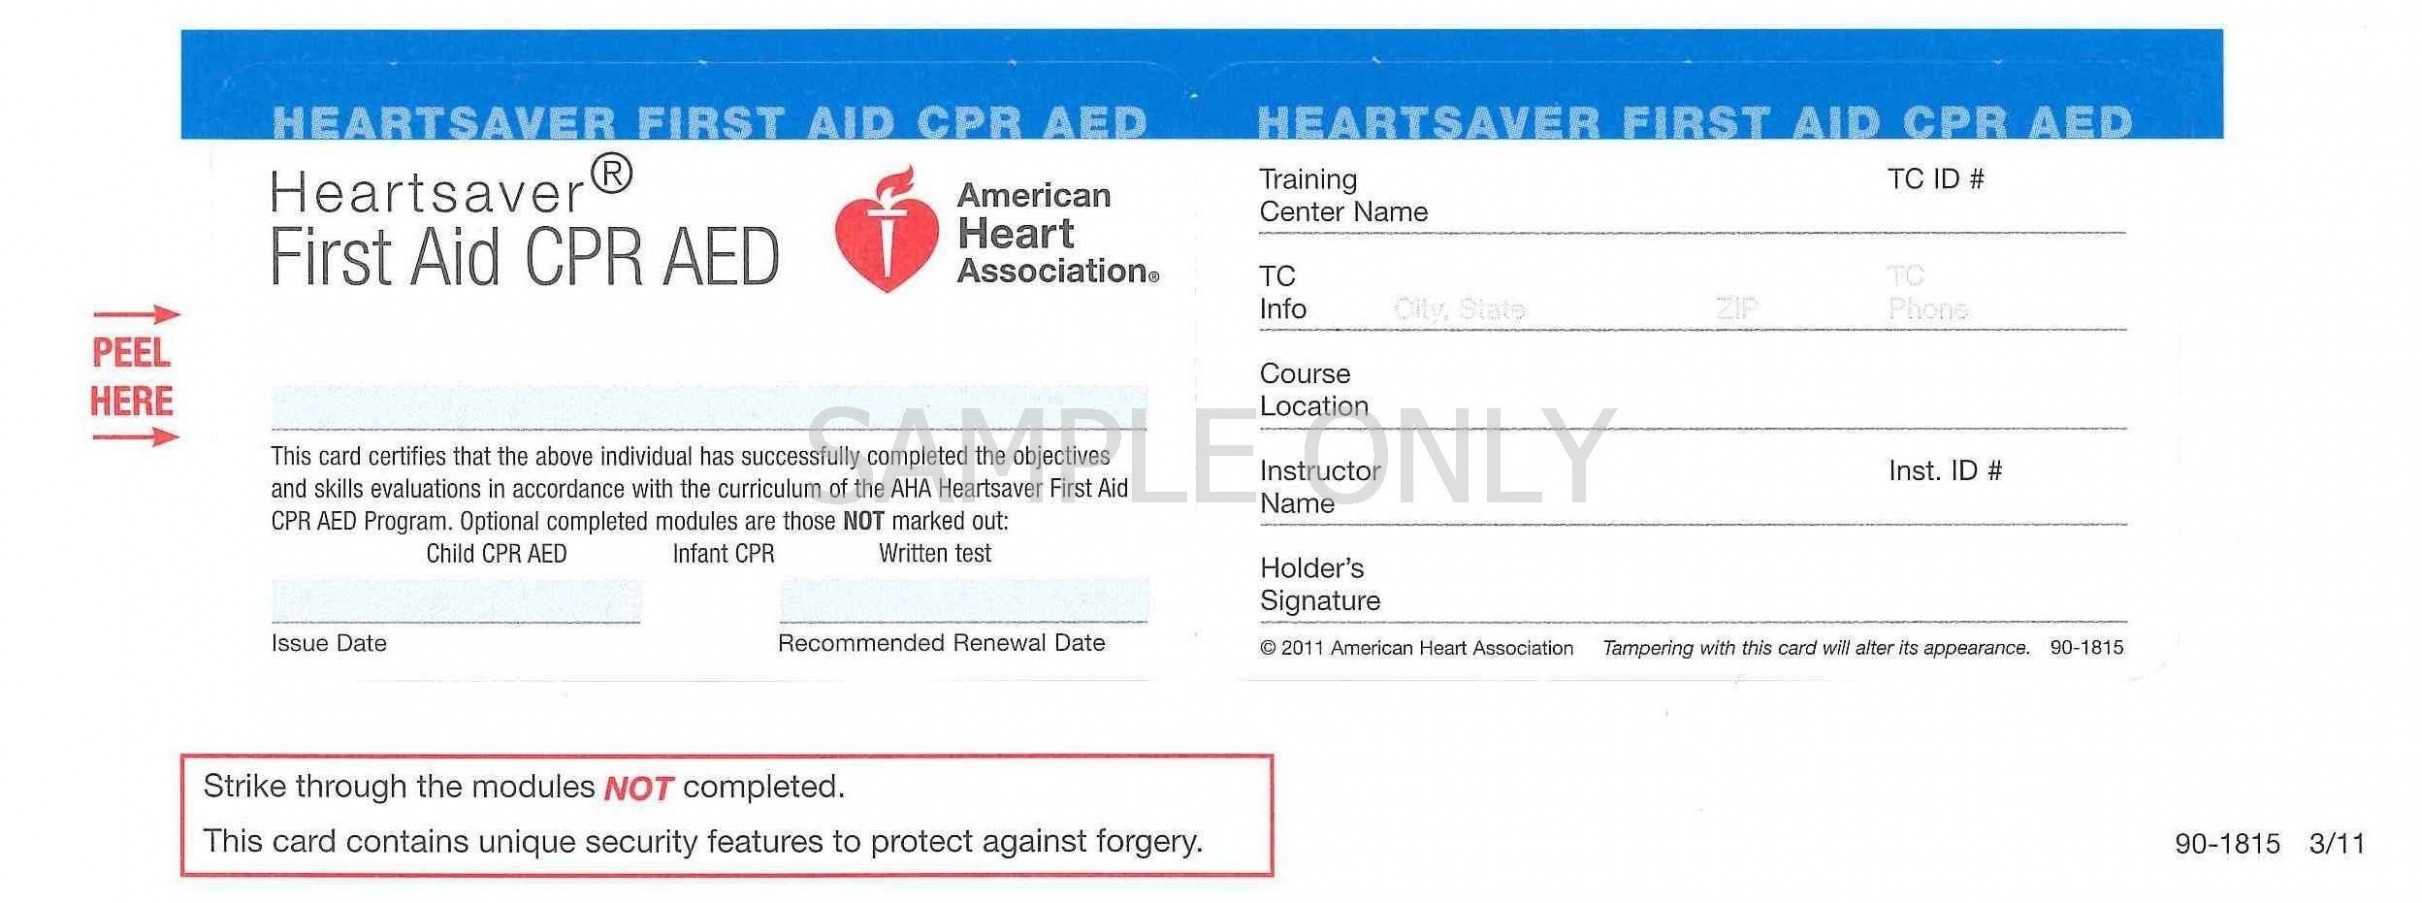 Blank Cpr Card Template | Invitation Card With Regard To Cpr Card Template